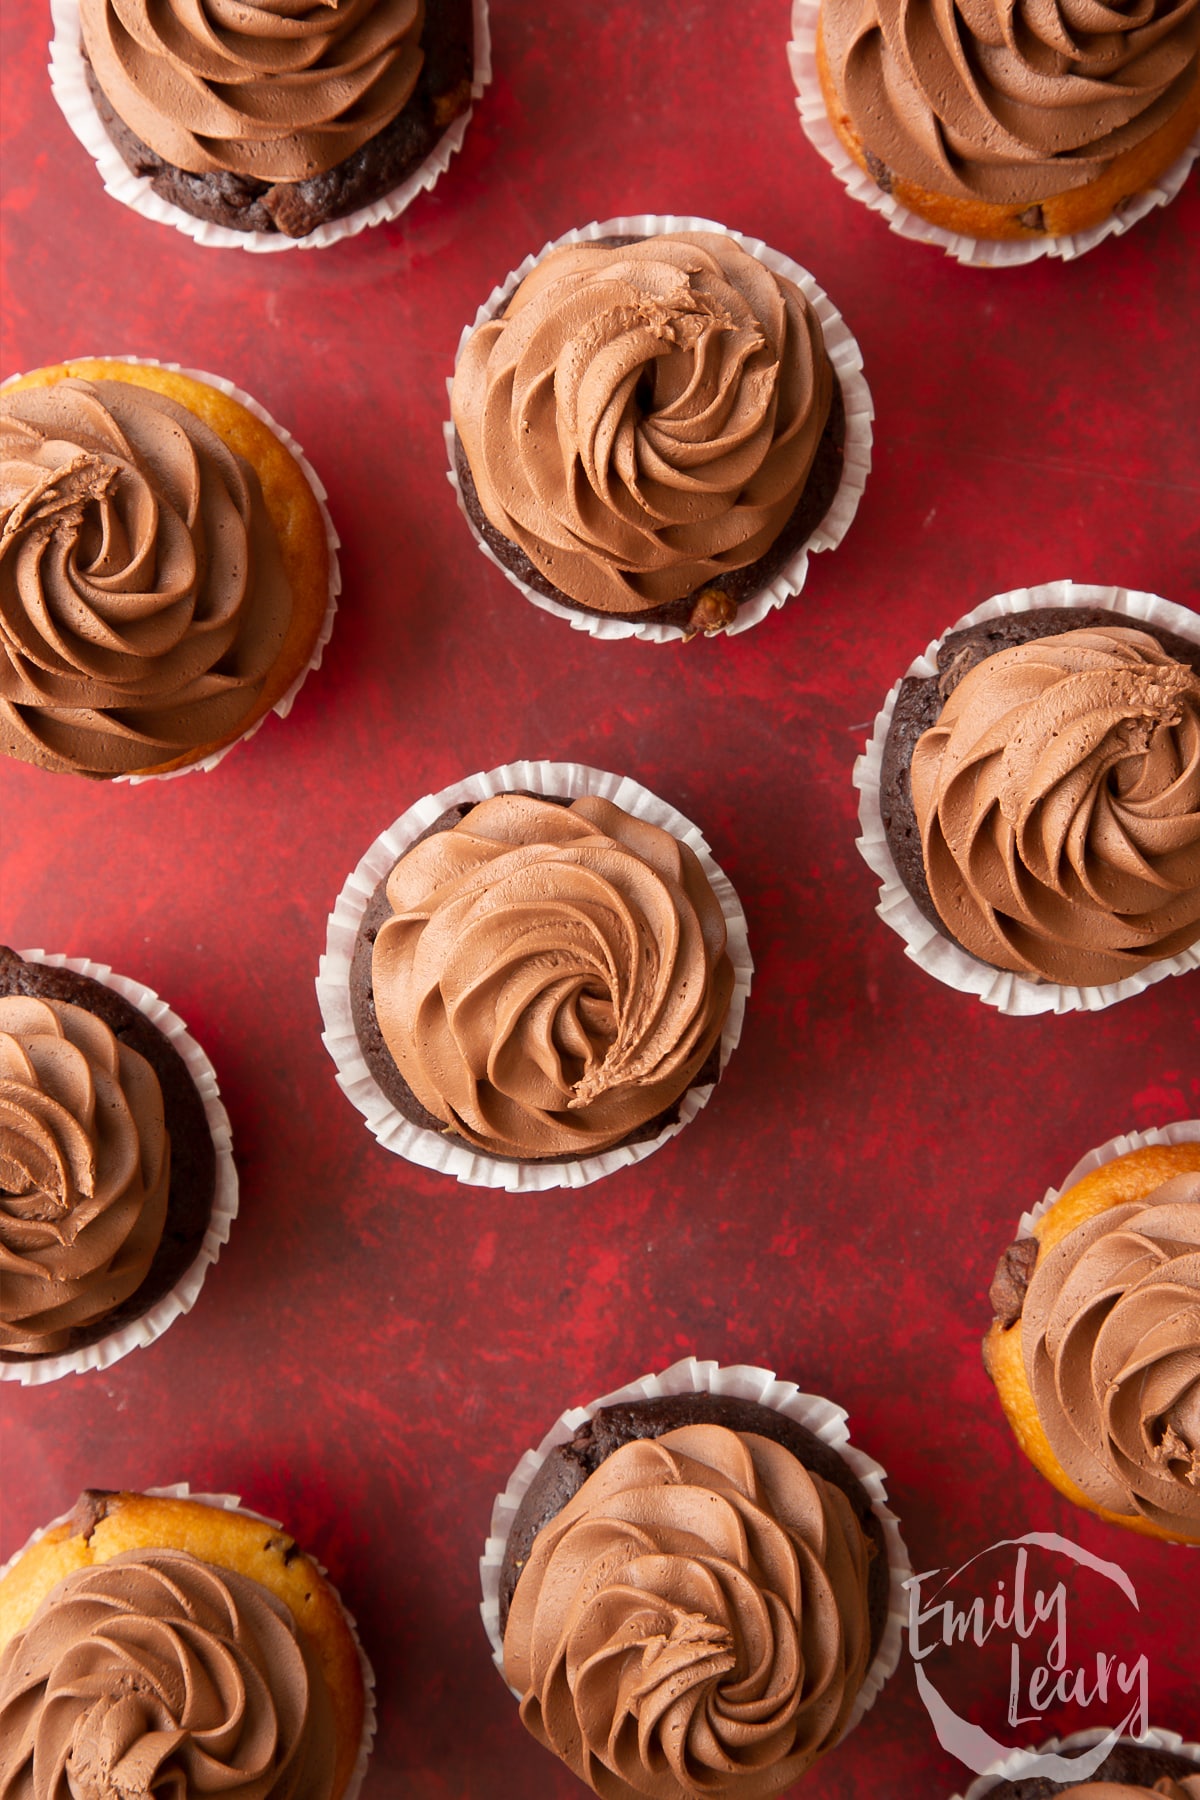 Overhead shot of chocolate muffins with chocolate buttercream icing.